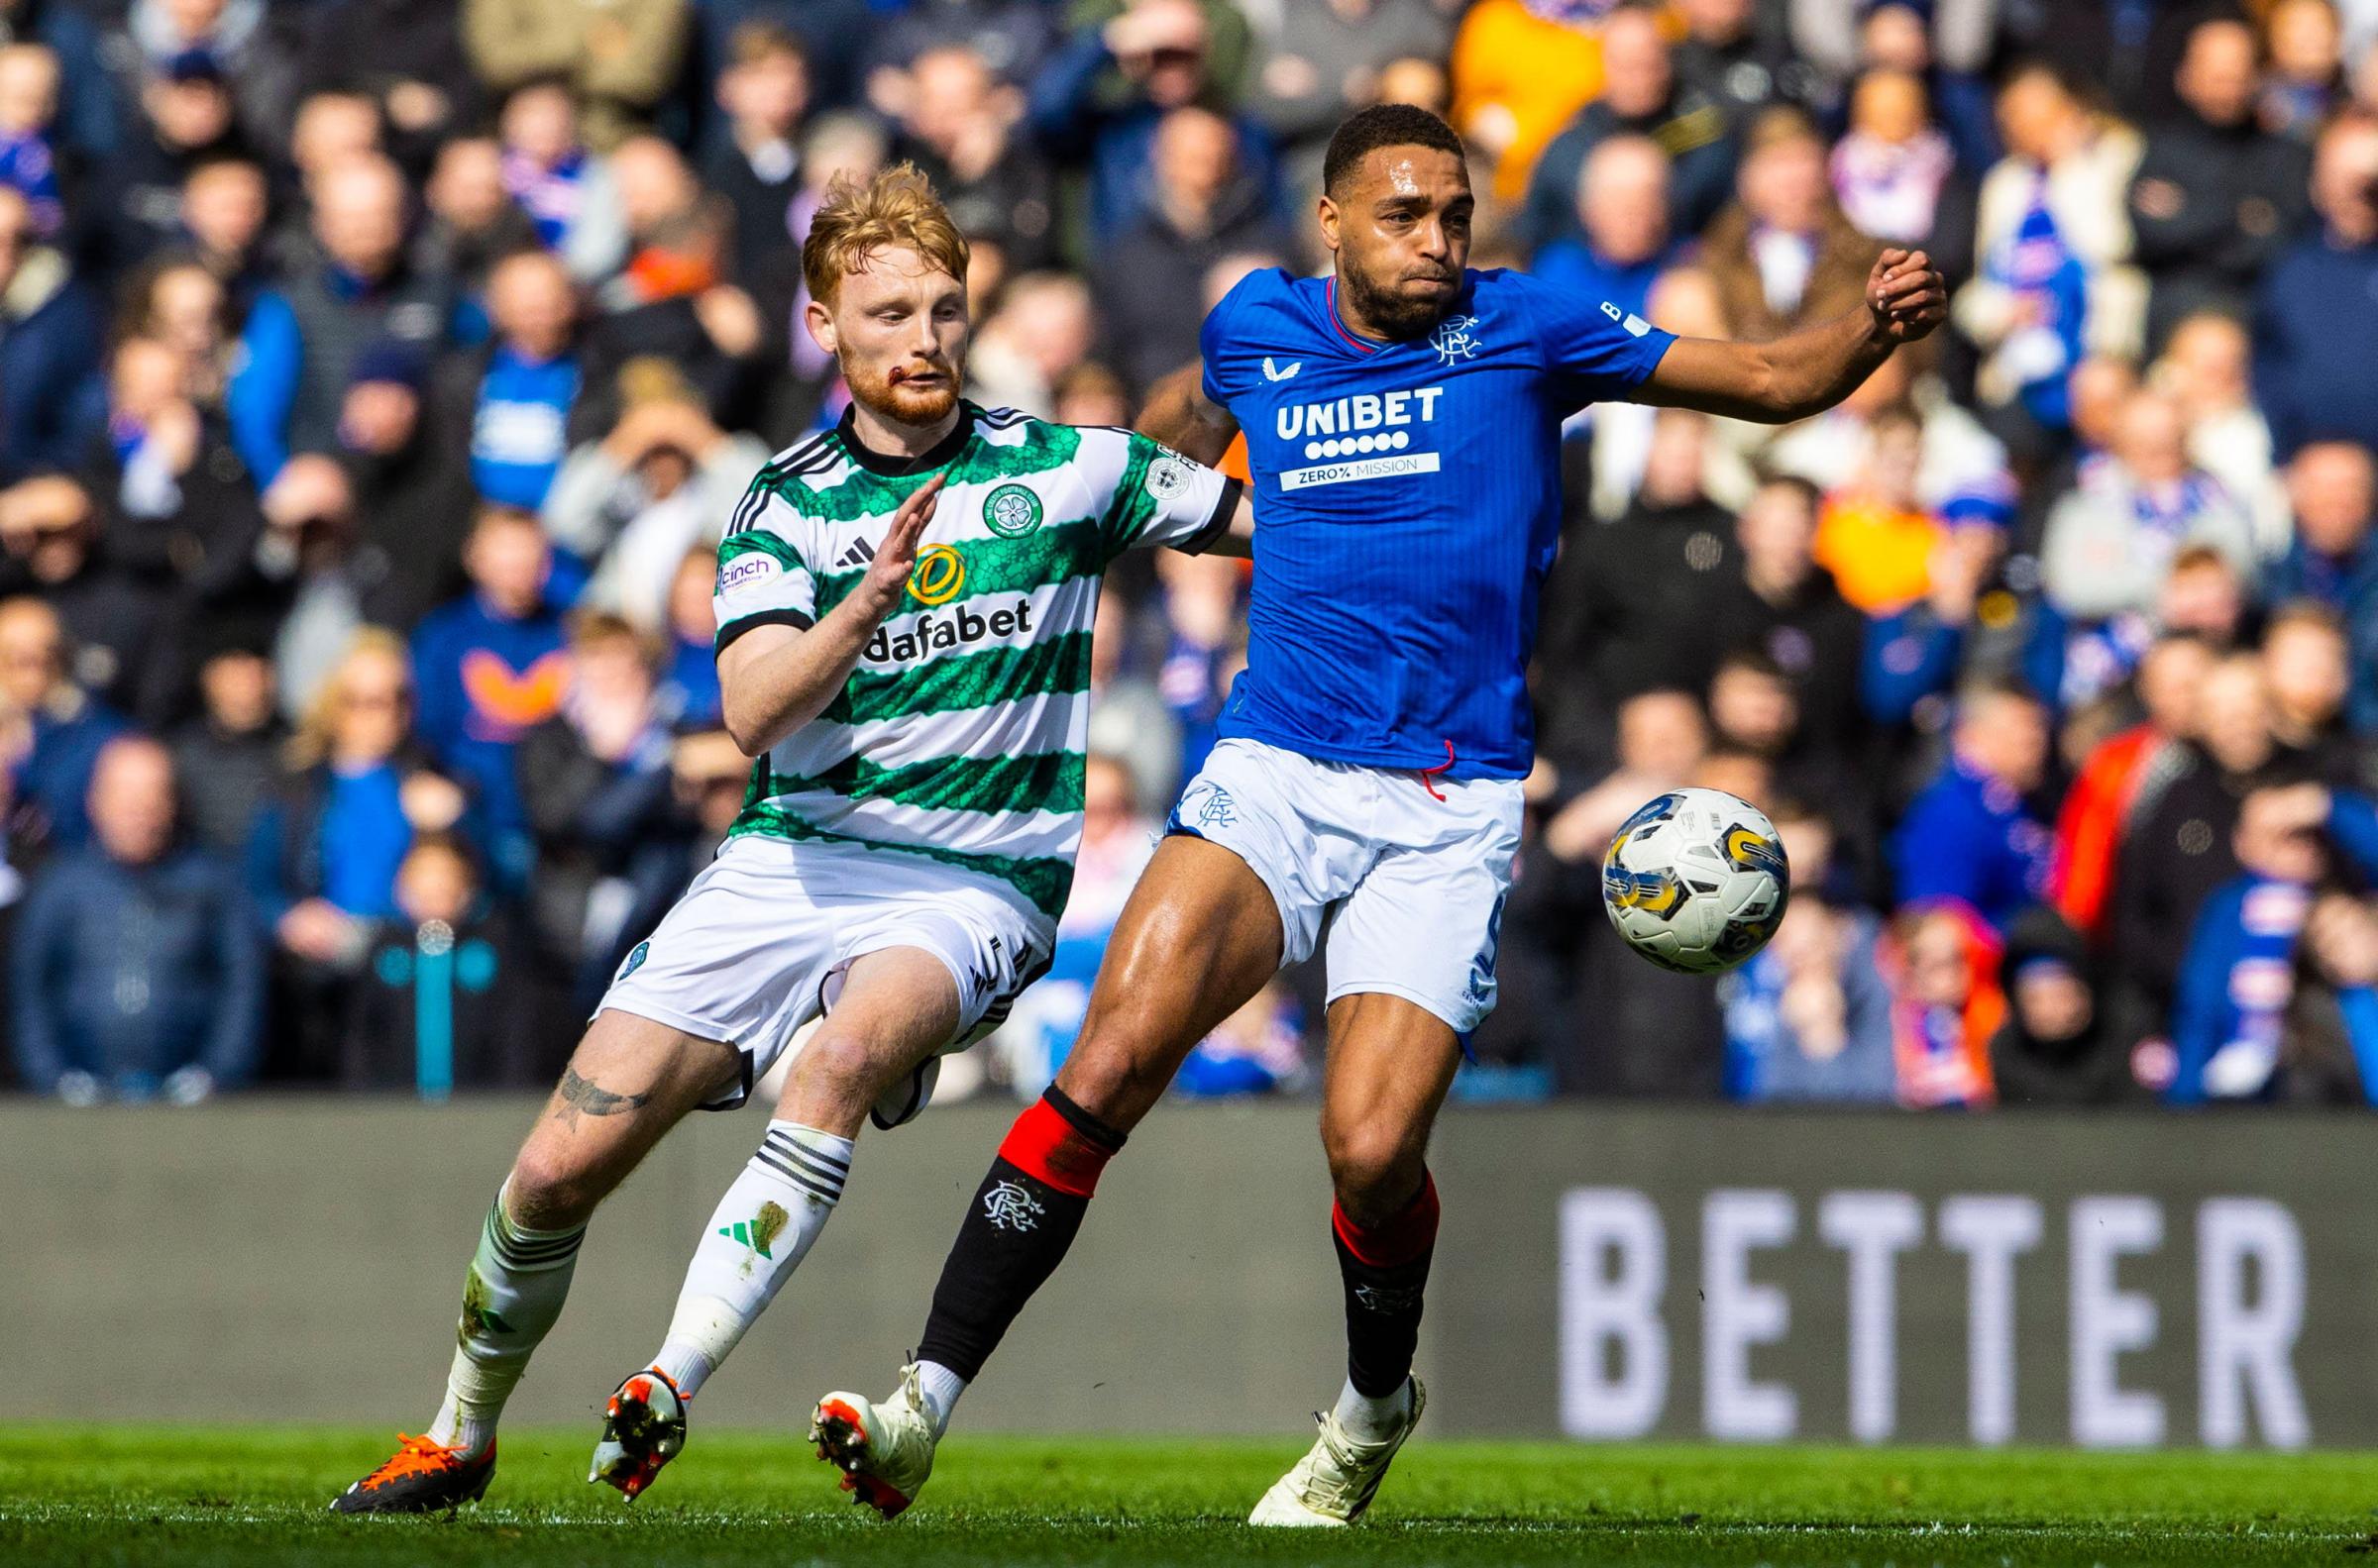 Celtic v Rangers predictions ahead of the Old Firm derby